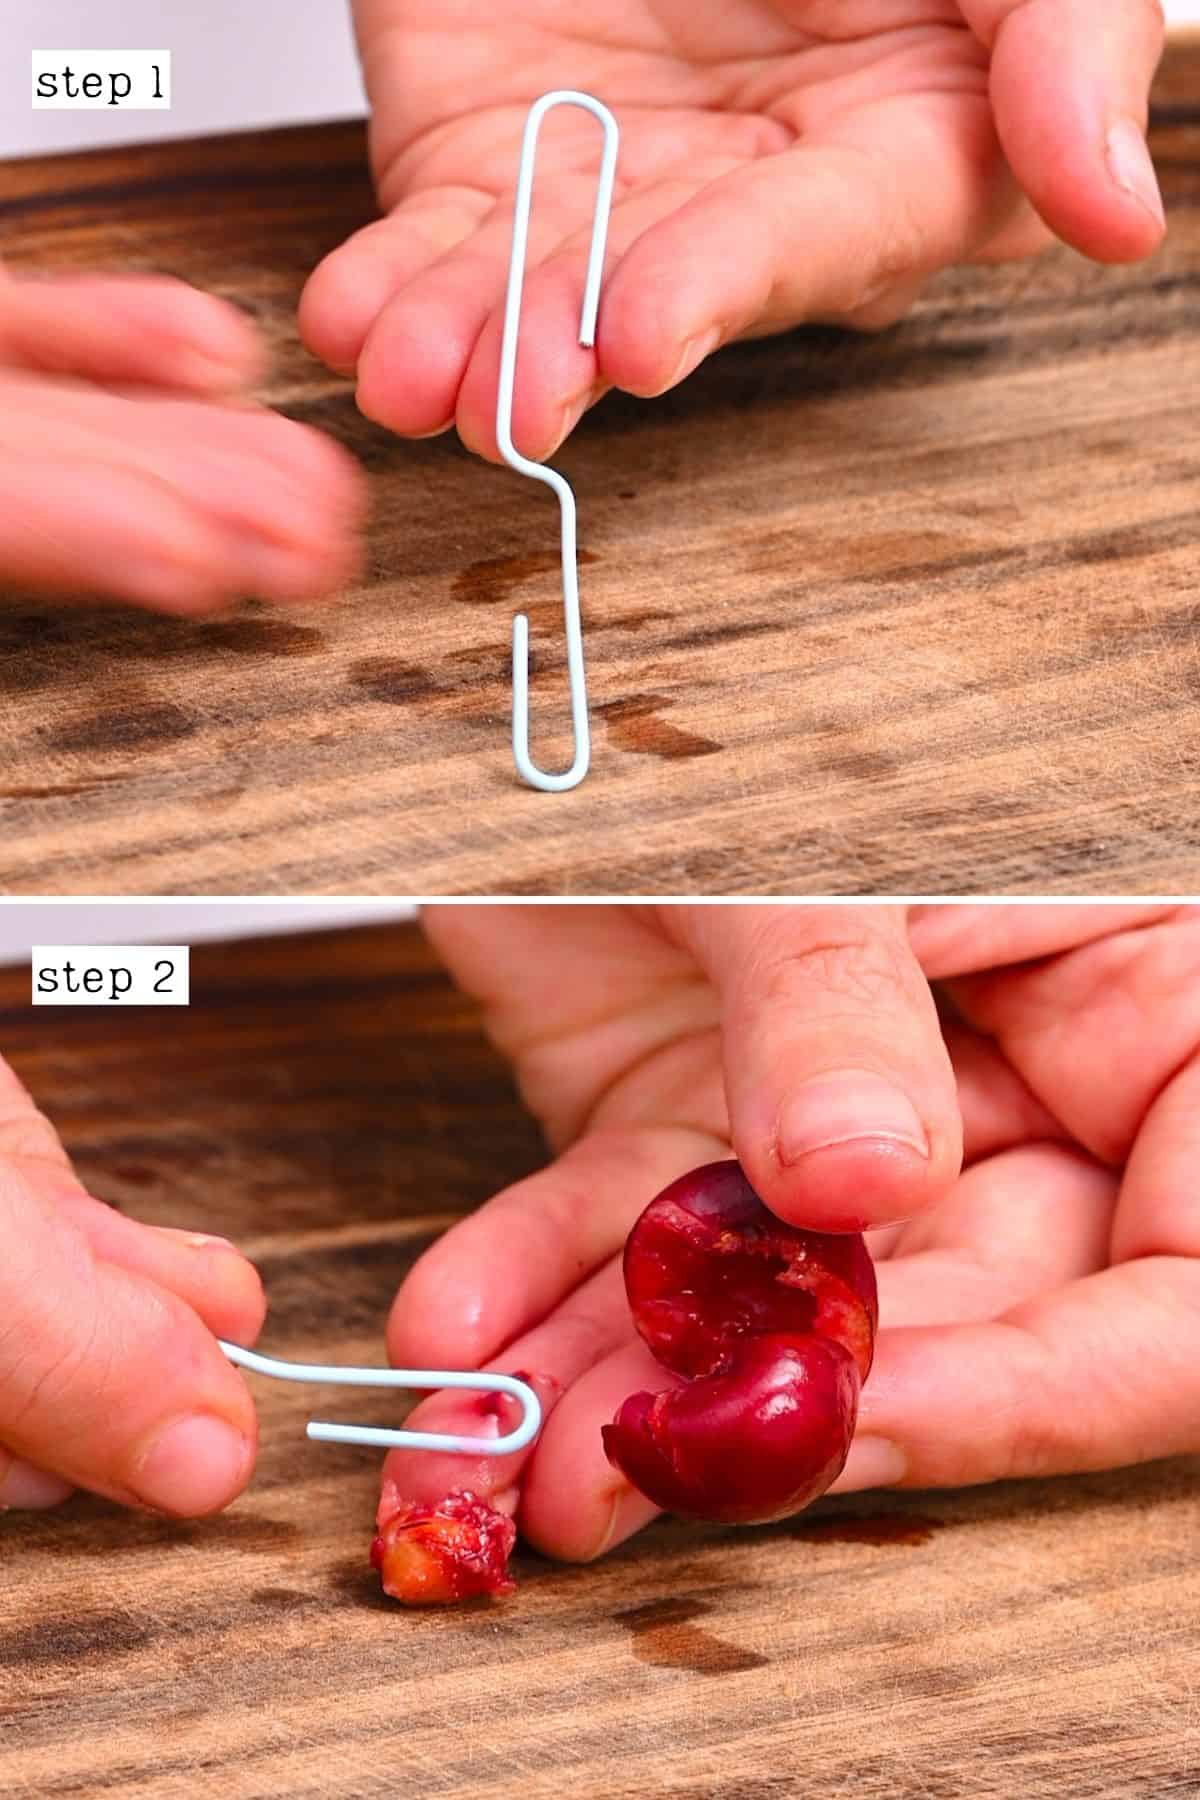 Removing the cherry pit with a paper clip